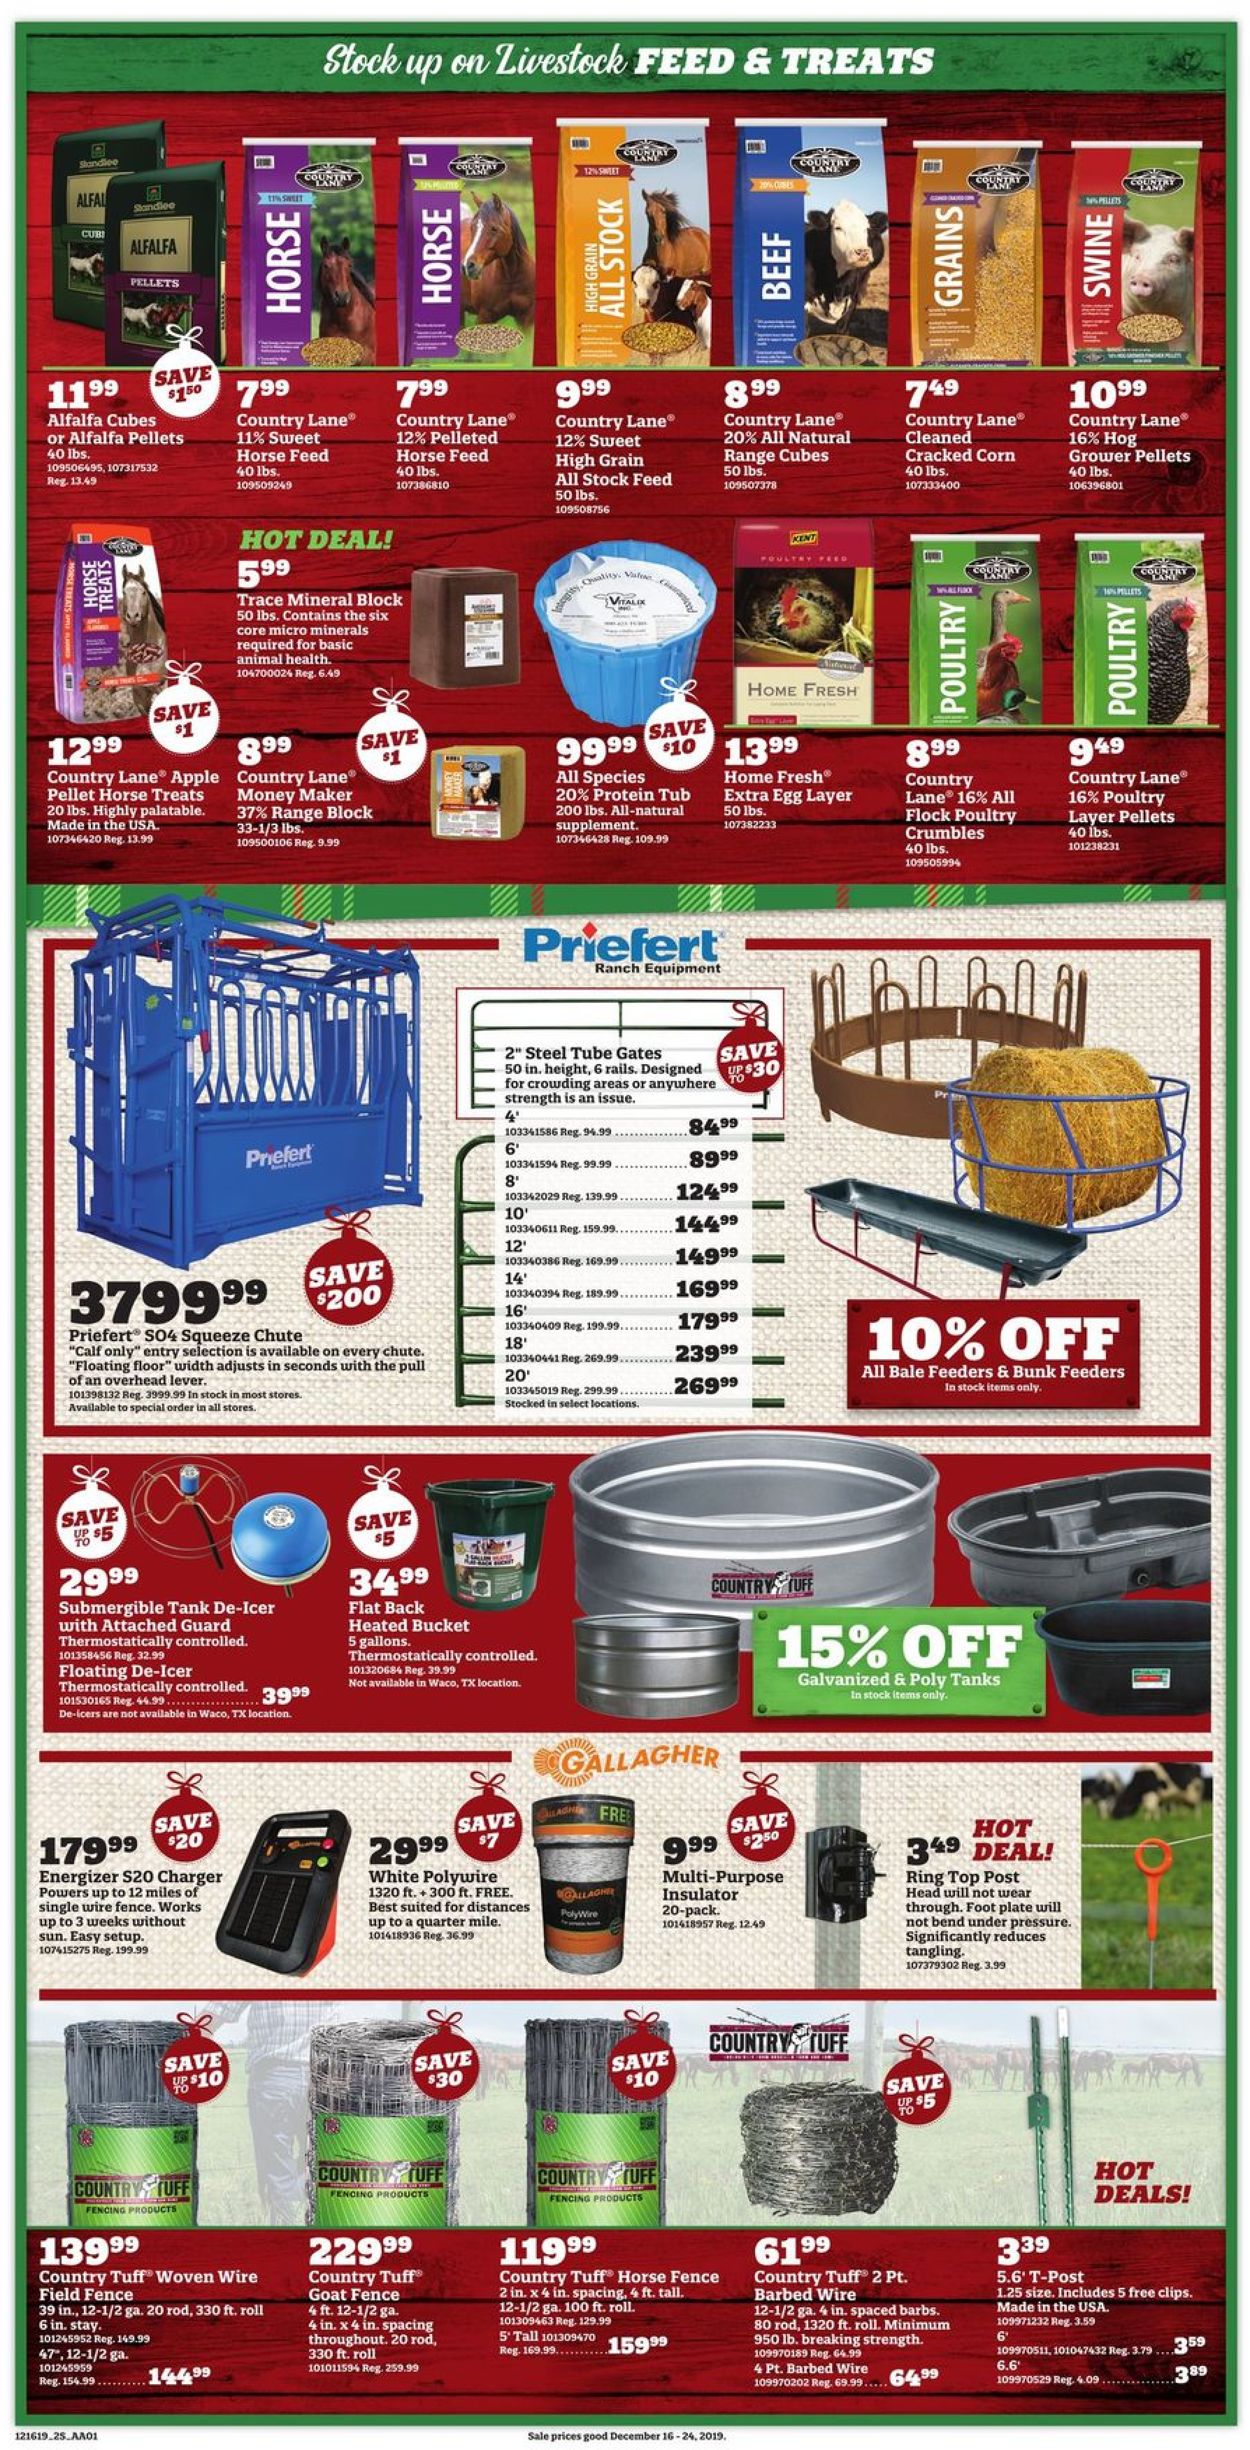 Orscheln Farm and Home - Christmas Ad 2019 Weekly Ad Circular - valid 12/16-12/24/2019 (Page 2)